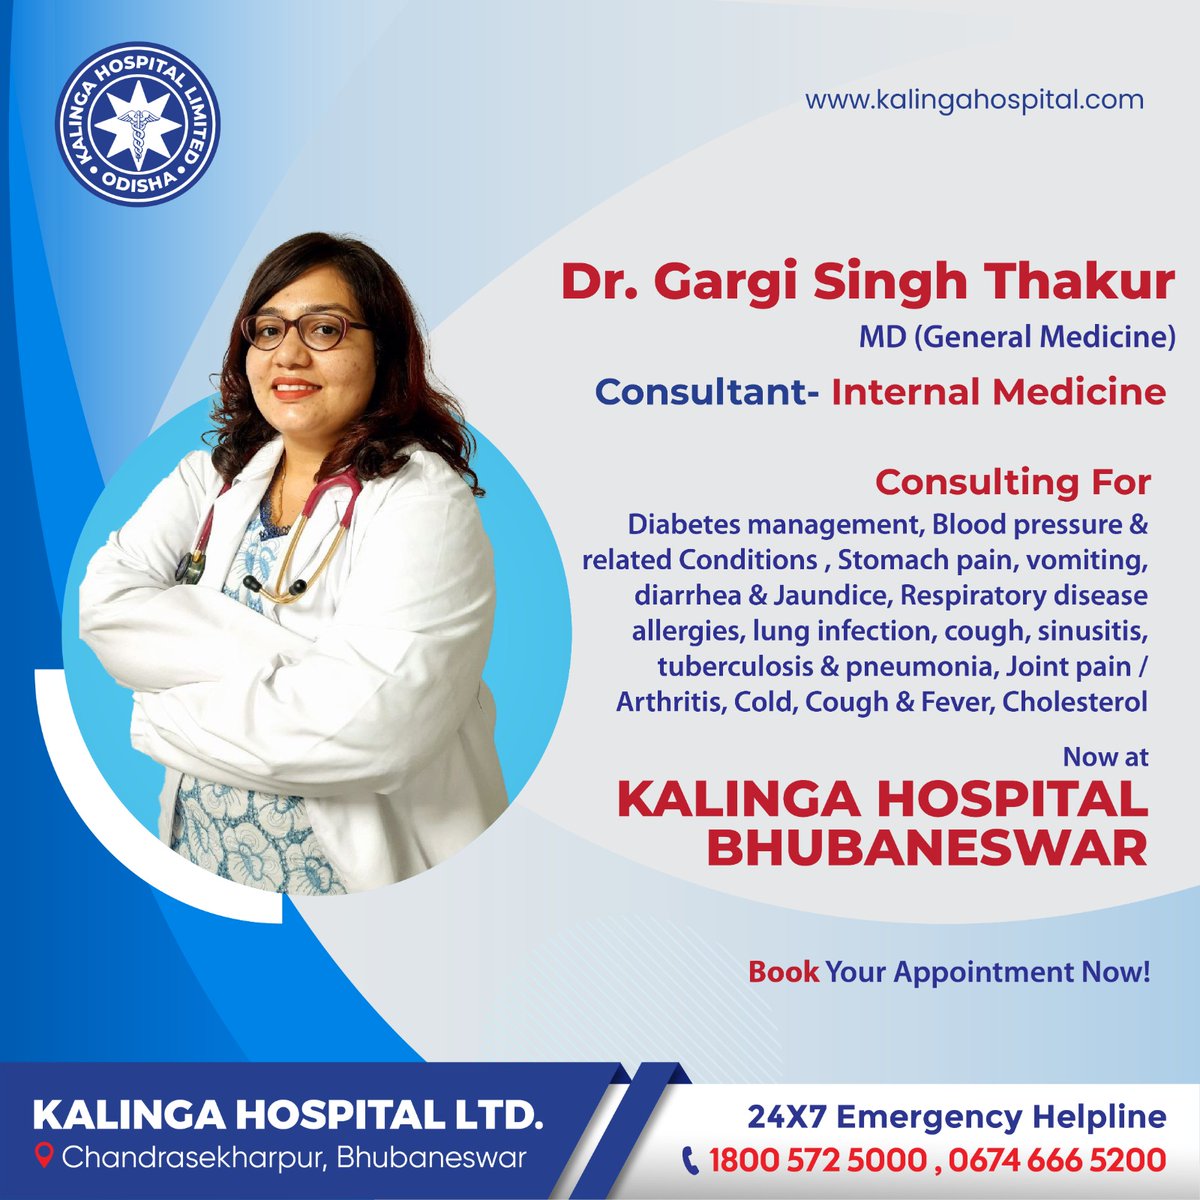 Odisha's esteemed 𝐃𝐫. 𝐆𝐚𝐫𝐠𝐢 𝐒𝐢𝐧𝐠𝐡 𝐓𝐡𝐚𝐤𝐮𝐫, Consultant in Internal Medicine, now at 𝐊𝐚𝐥𝐢𝐧𝐠𝐚 𝐇𝐨𝐬𝐩𝐢𝐭𝐚𝐥. Prioritize your well-being and secure your appointment today.

 #Healthcare #MedicalCare #WellnessConsultation #Bhubaneswar #KHL #ExpertCare